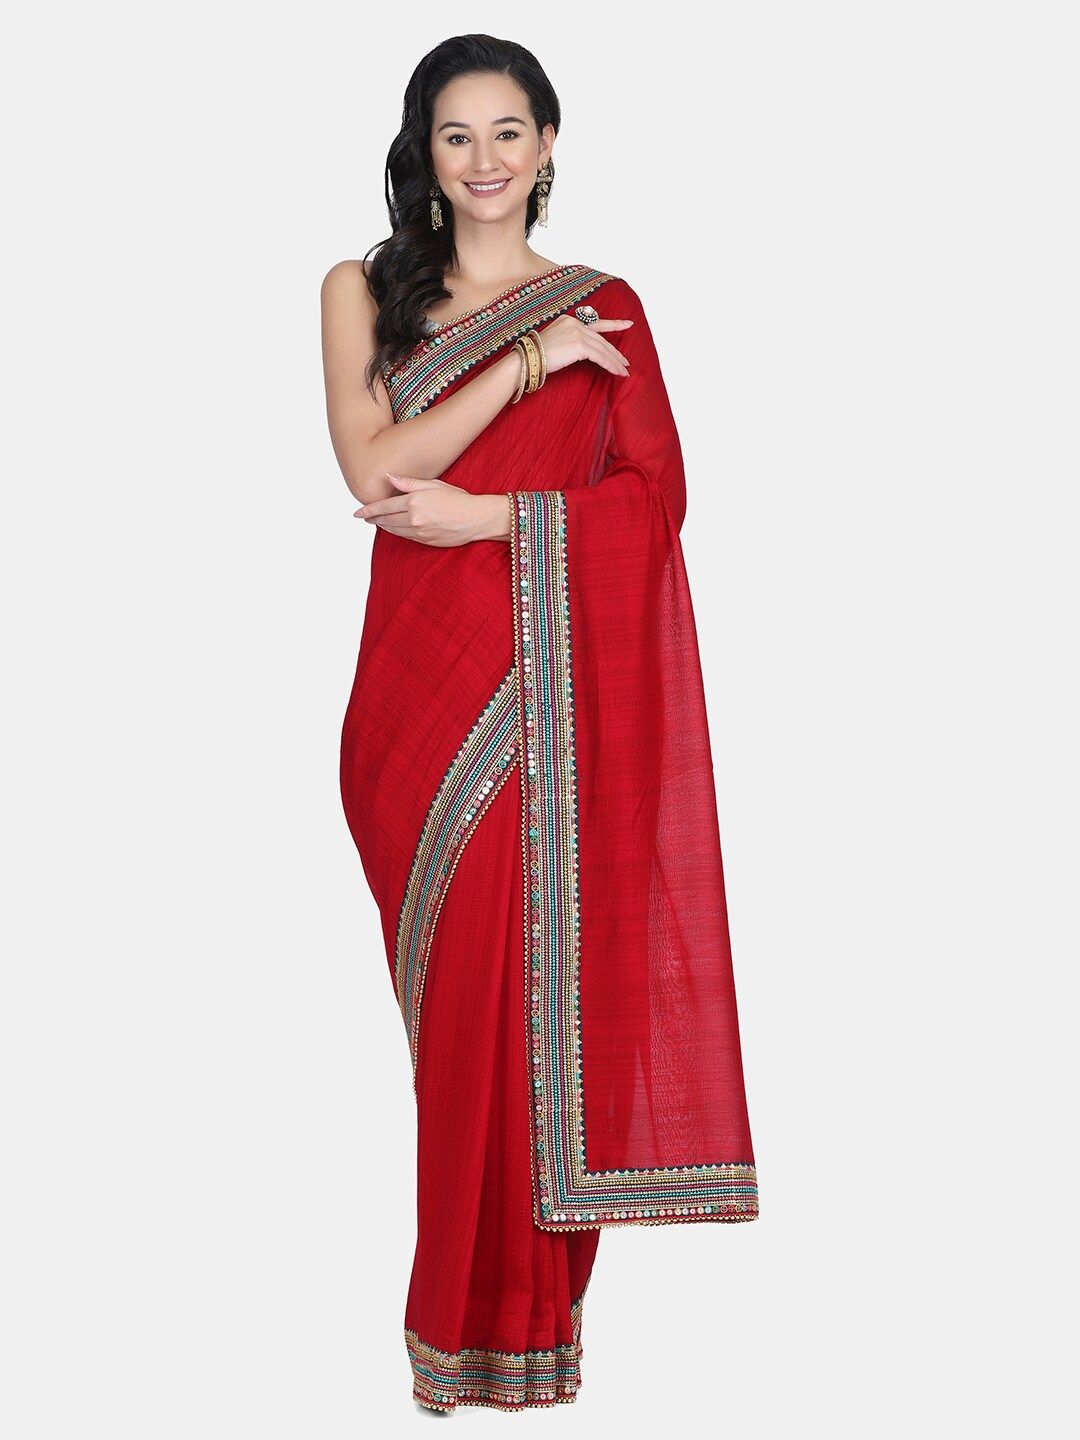 BOMBAY SELECTIONS Maroon & Blue Mirror Work Saree Price in India